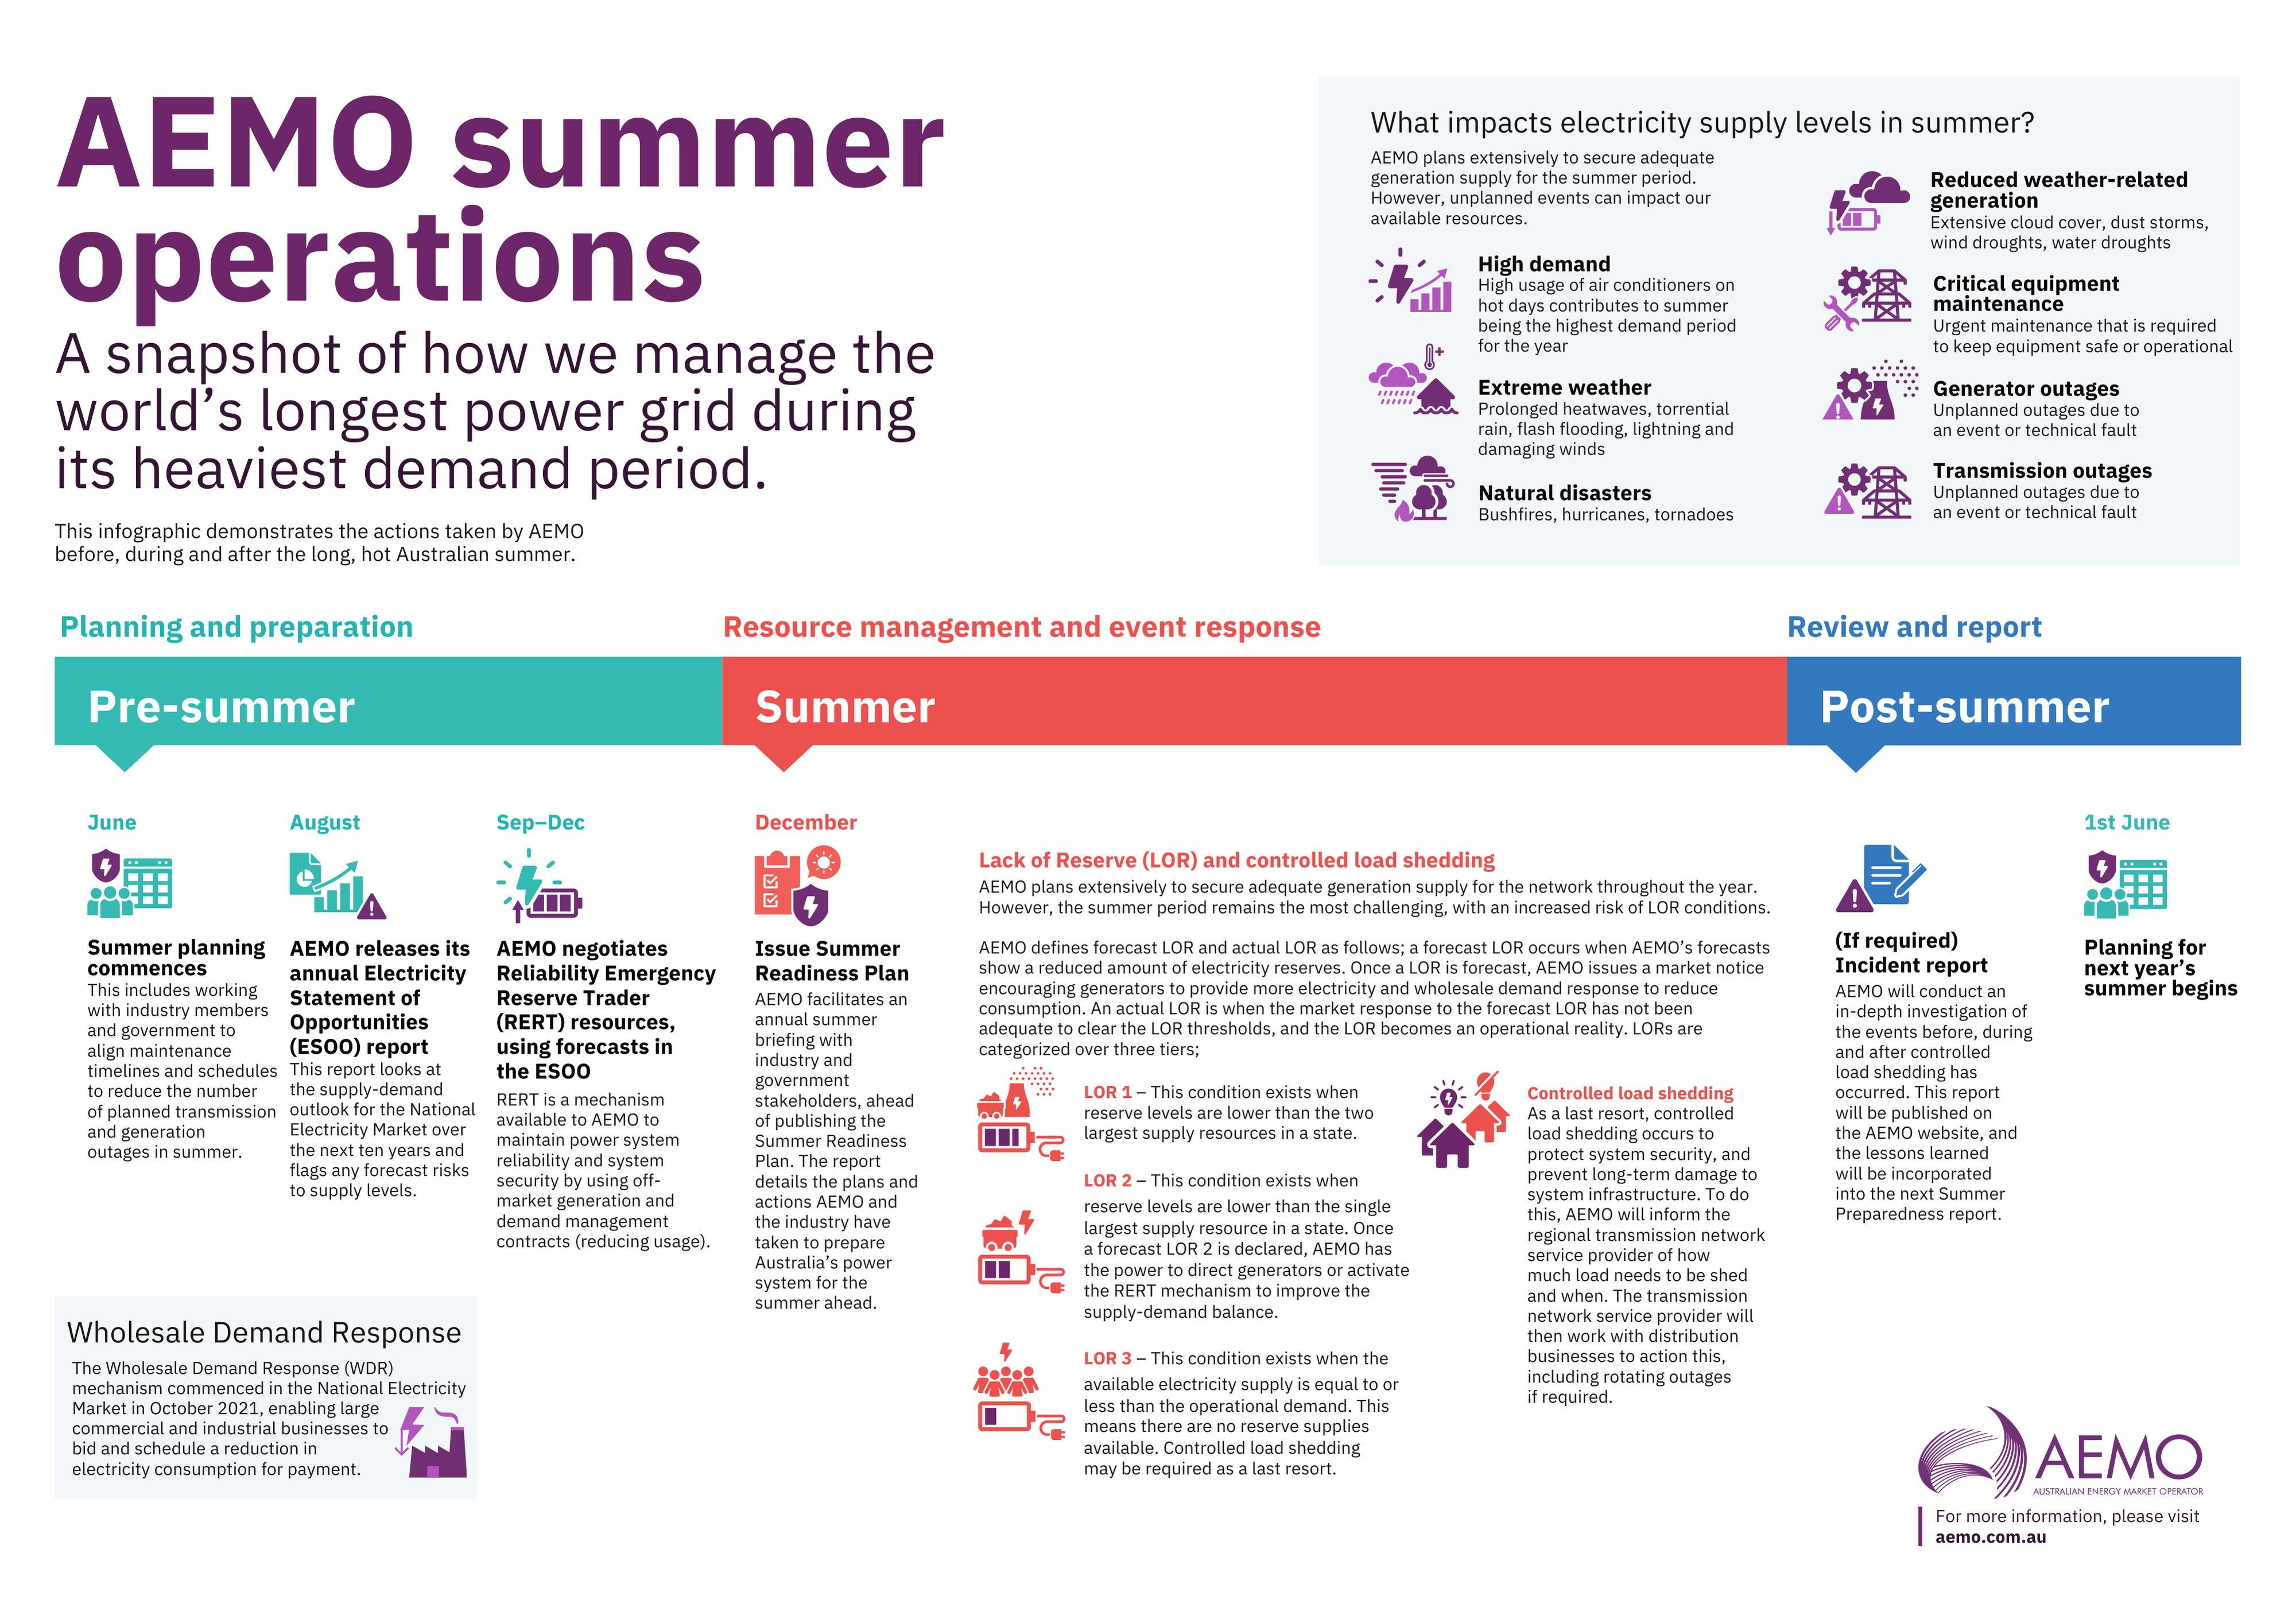 AEMO summer operations infographic: how AEMO manages the world's longest power grid during its heaviest demand period